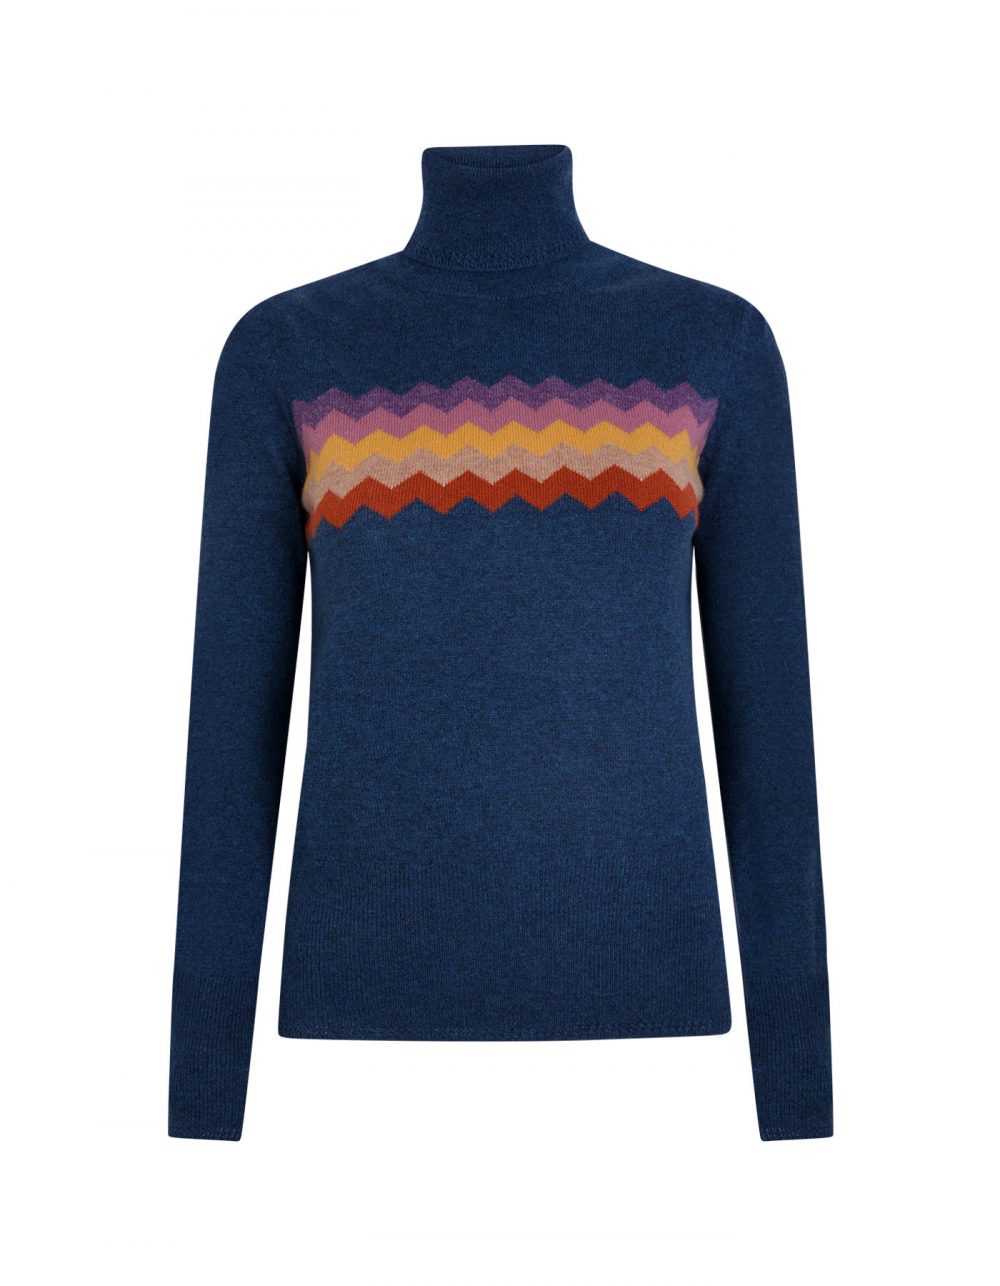 A blue cashmere jumper with a multi-coloured Zigzag pattern on the front.